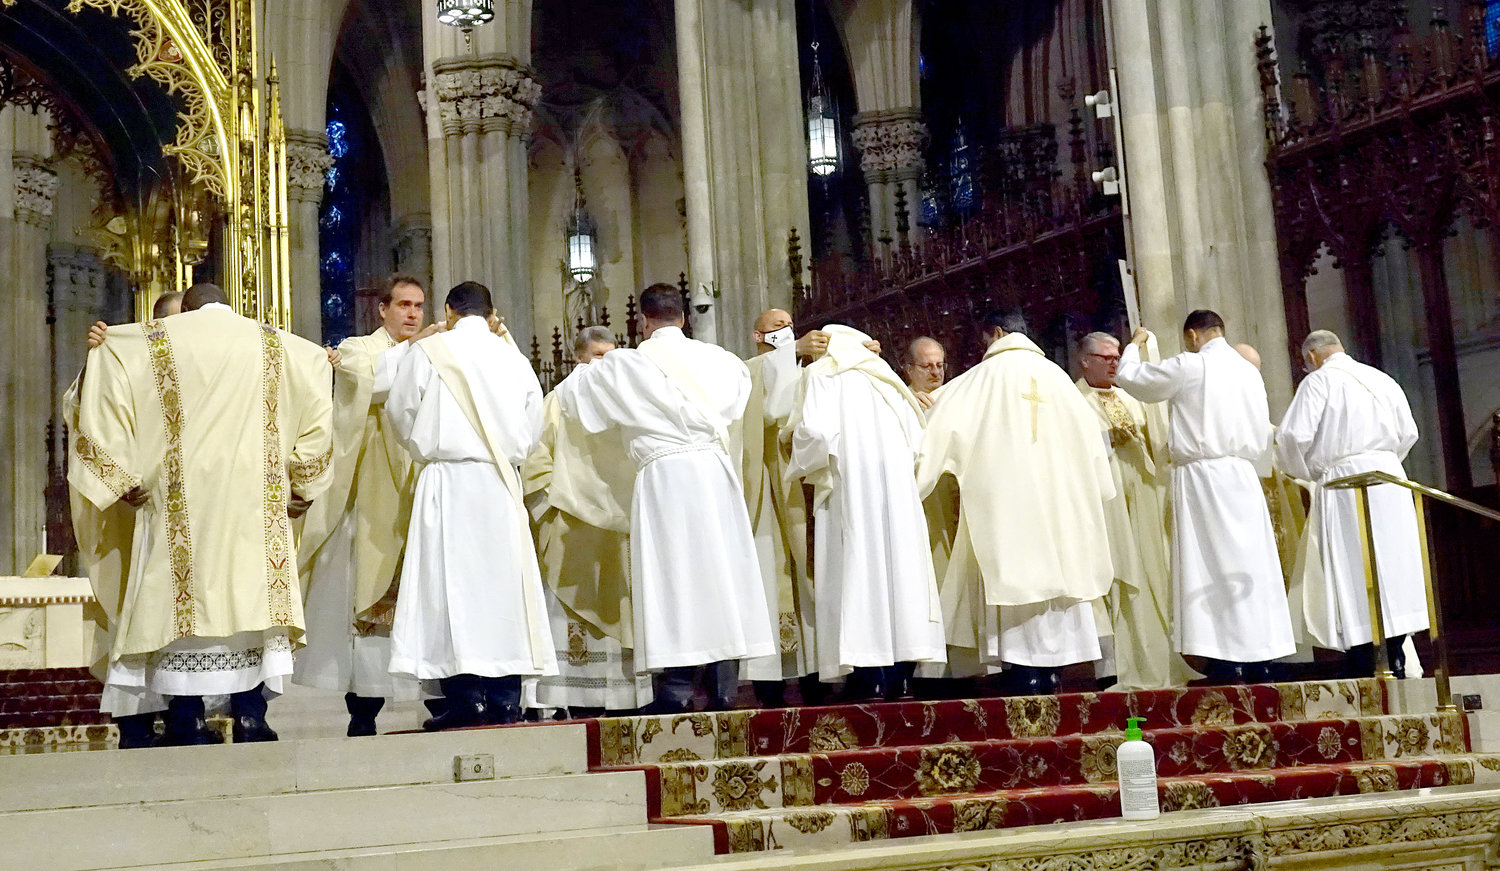 The new deacons are helped with their vestments during the Ordination Rite.